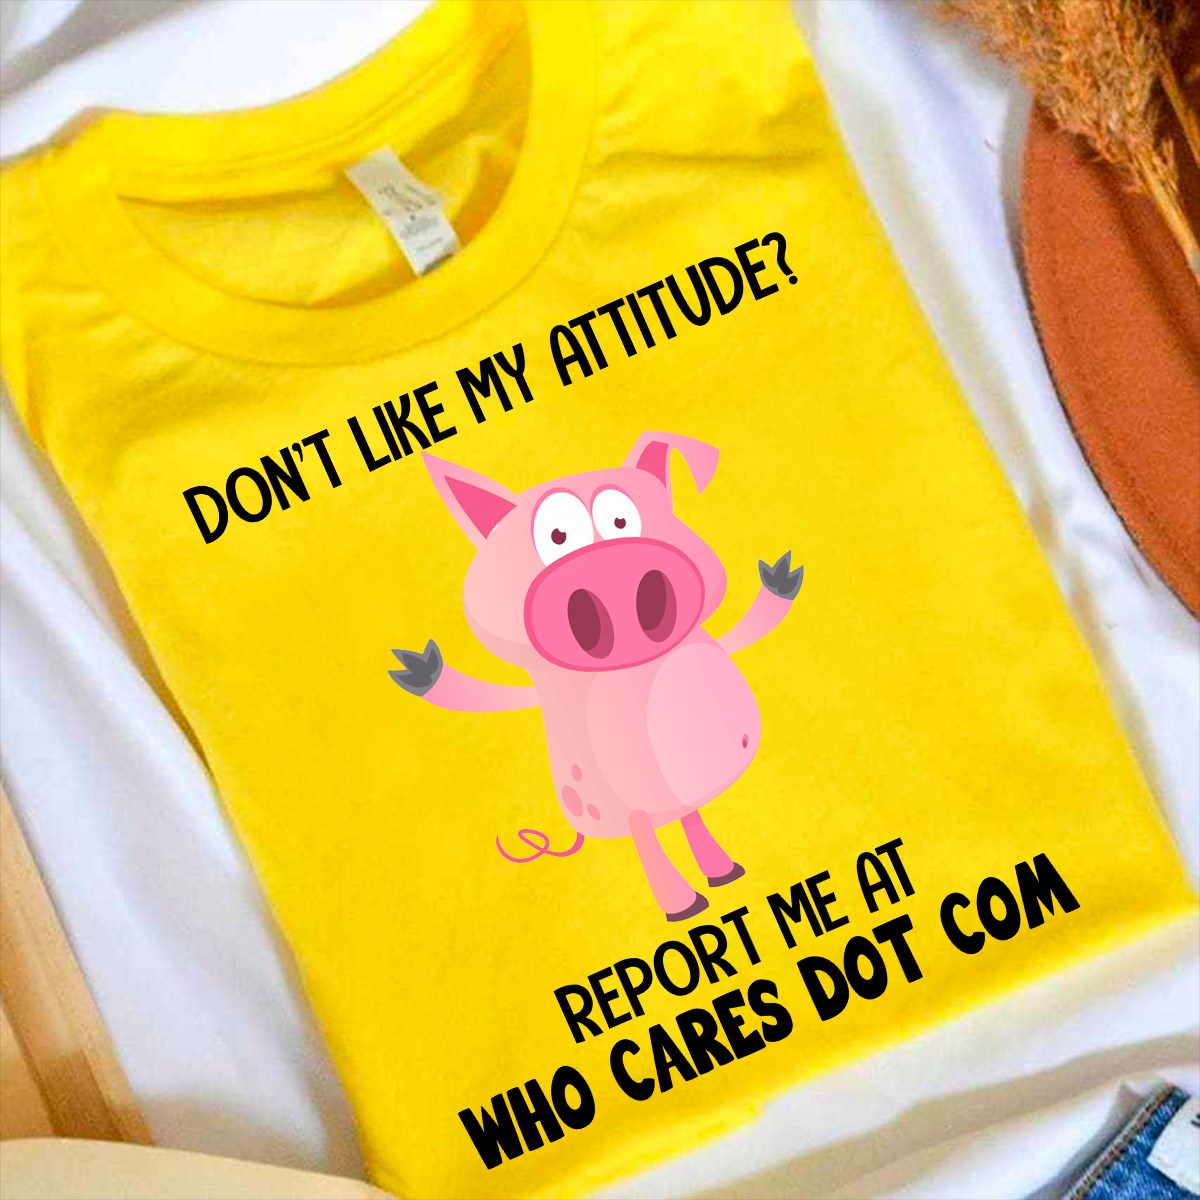 Don't like my attitude Report me at who cares dot com - Grumpy pig